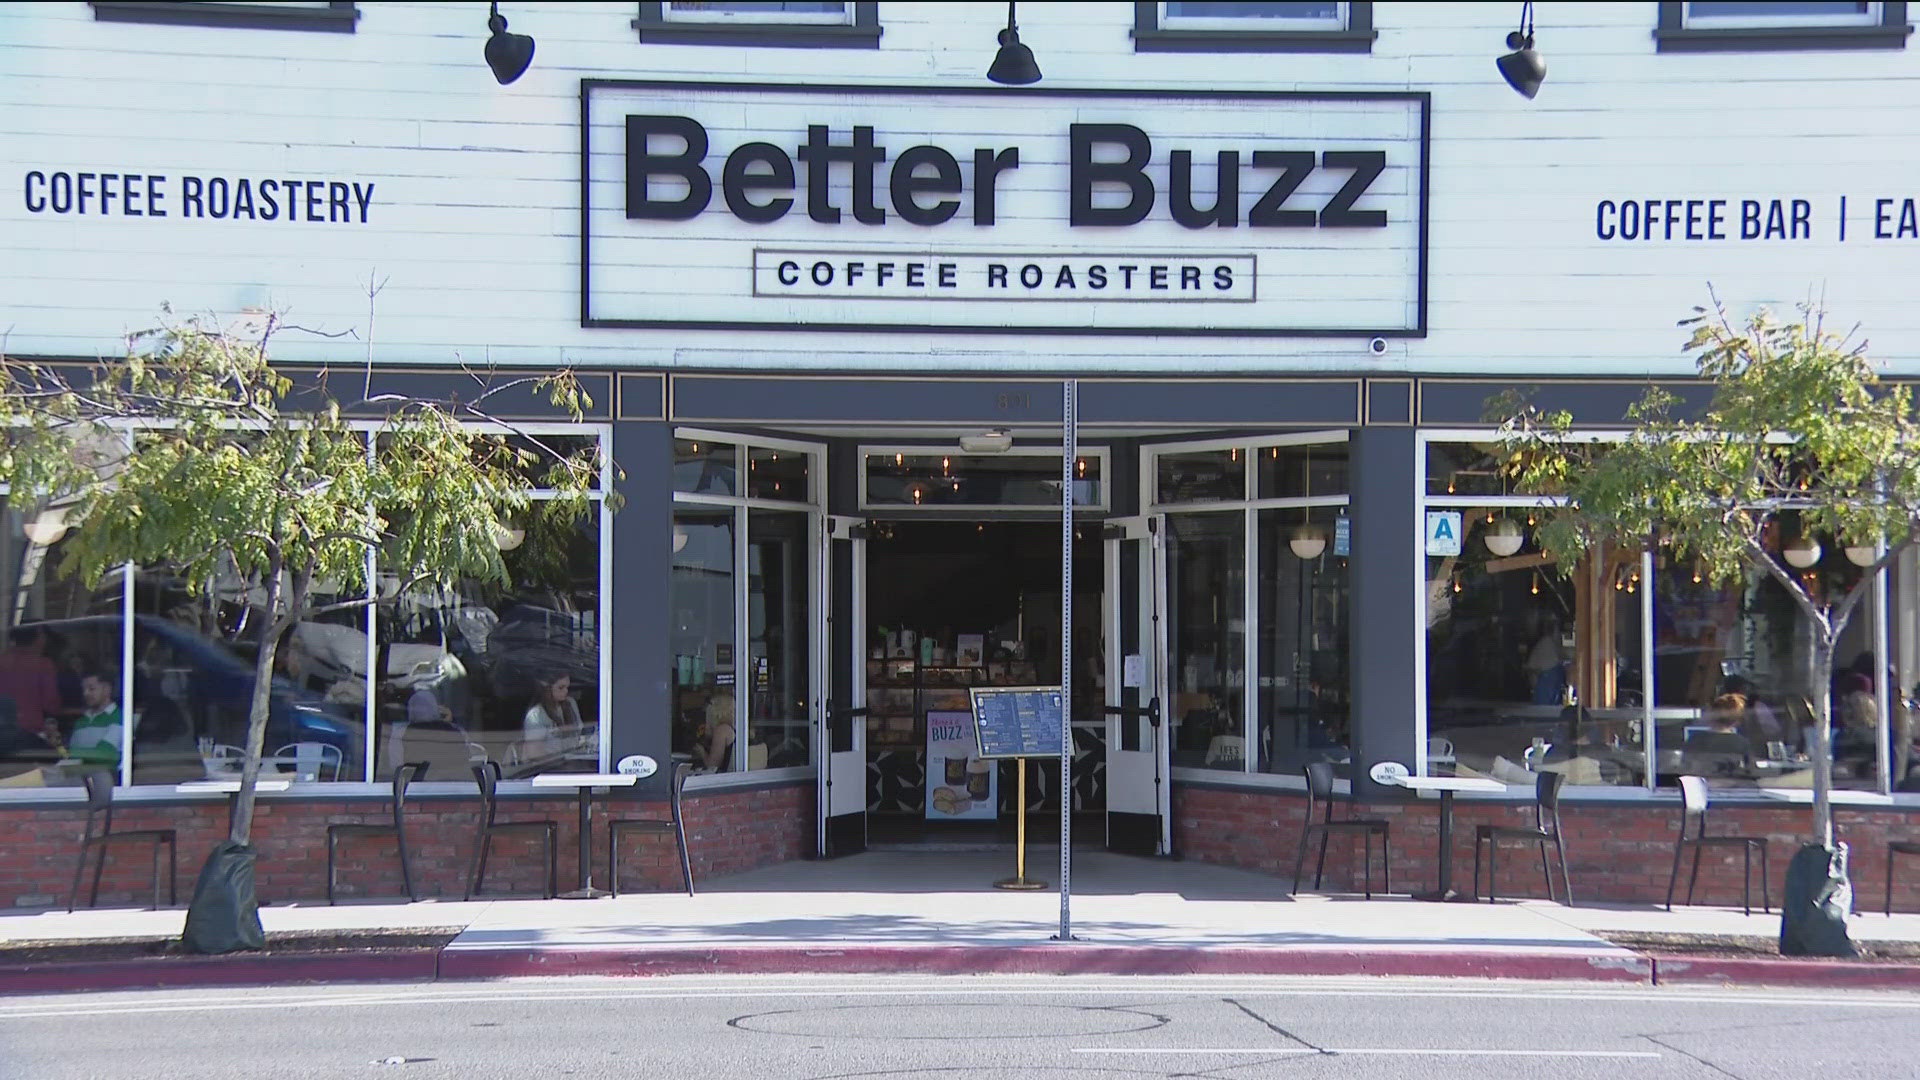 Better Buzz Coffee is continuing to expand, now with more than 20 locations in Southern California and beyond. This includes new branches opening in Arizona.